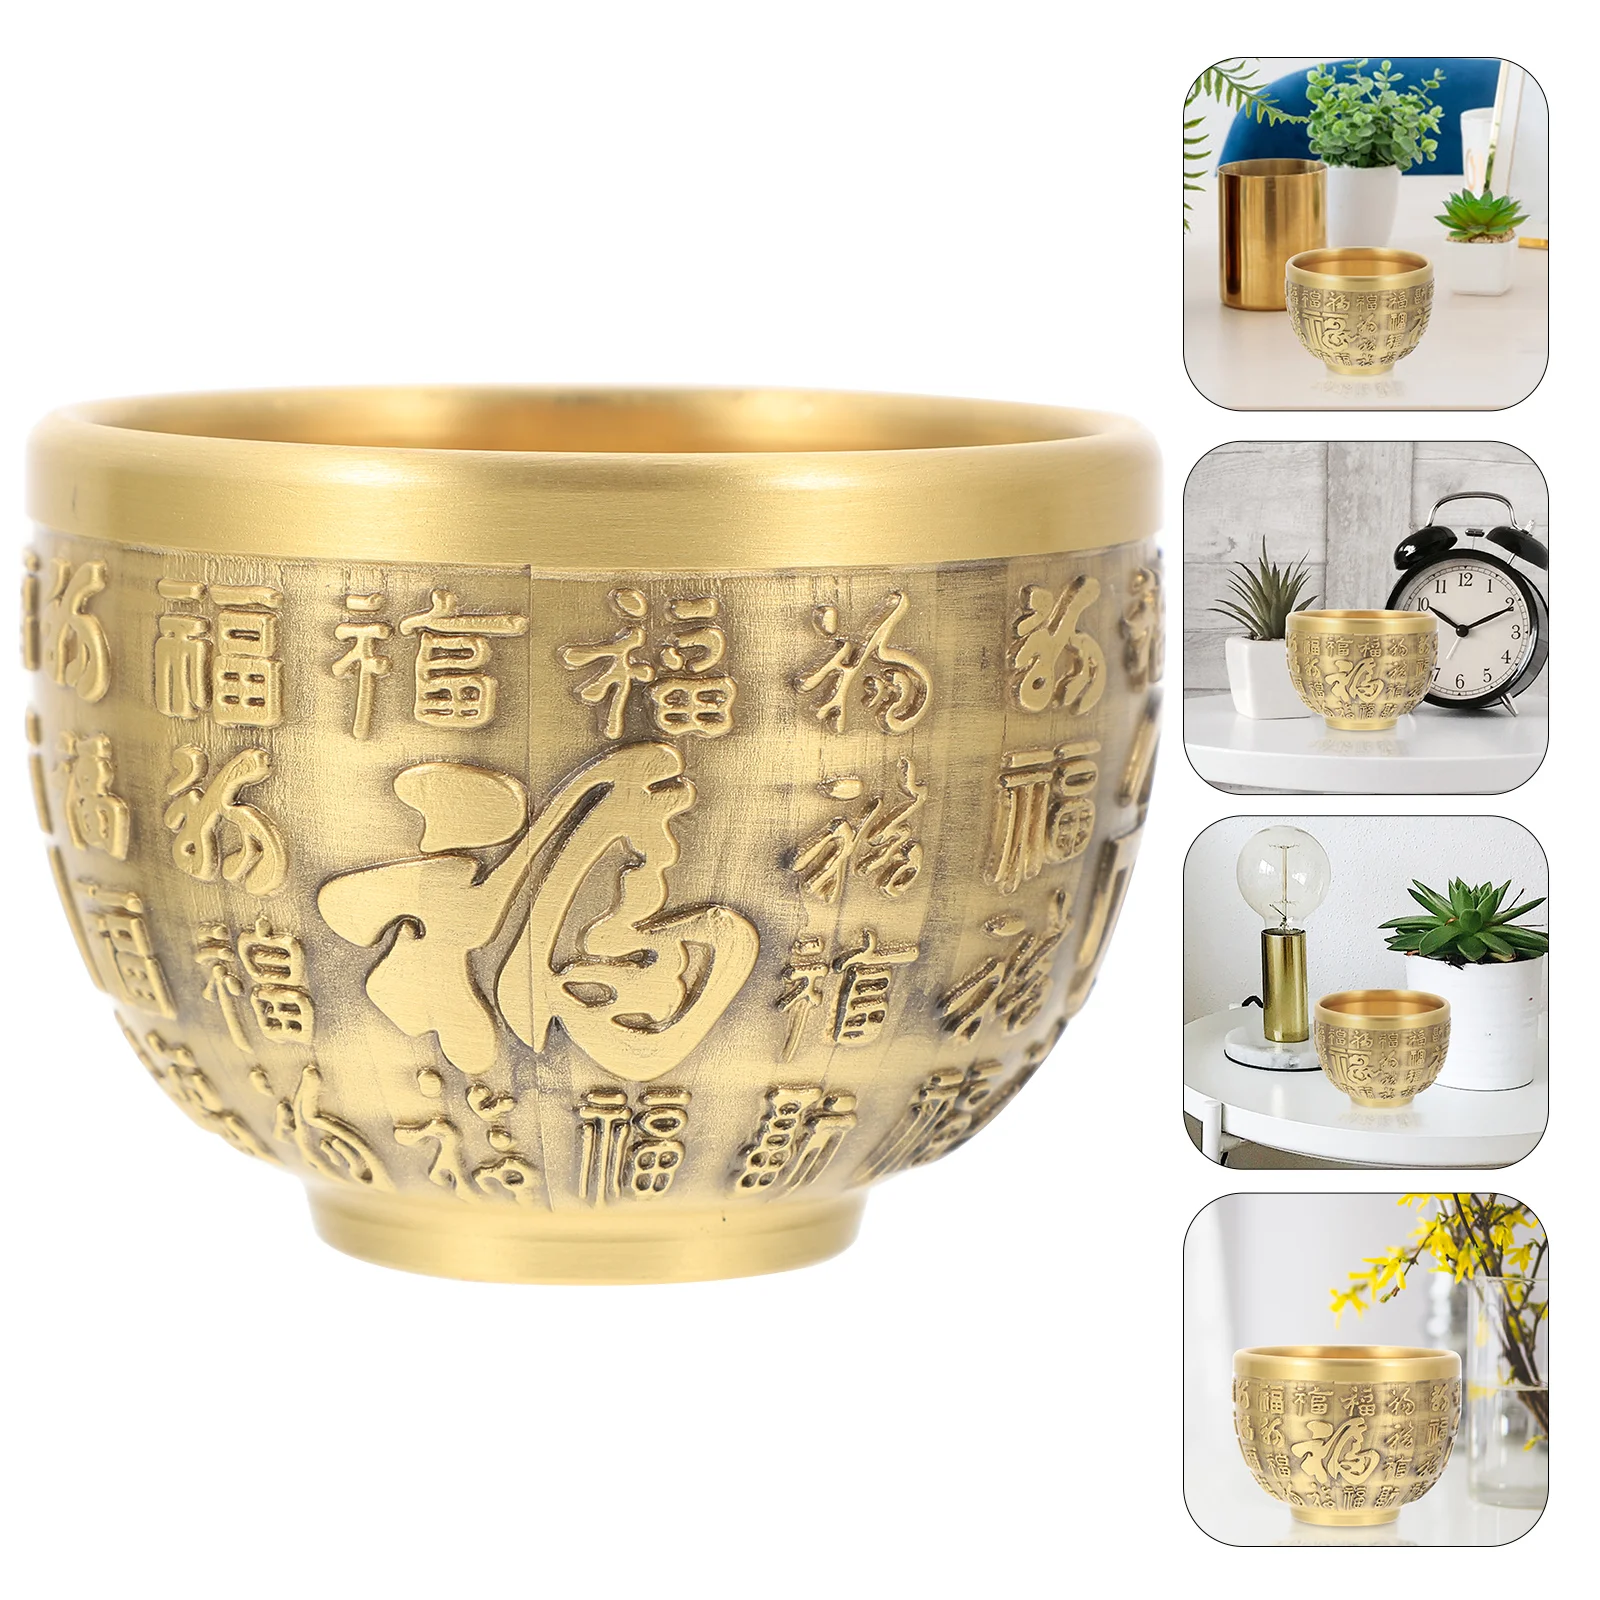 Bowl-Treasure-Basin-Chinese-Offering-Decor-Lucky-Feng-Brass-Shui ...